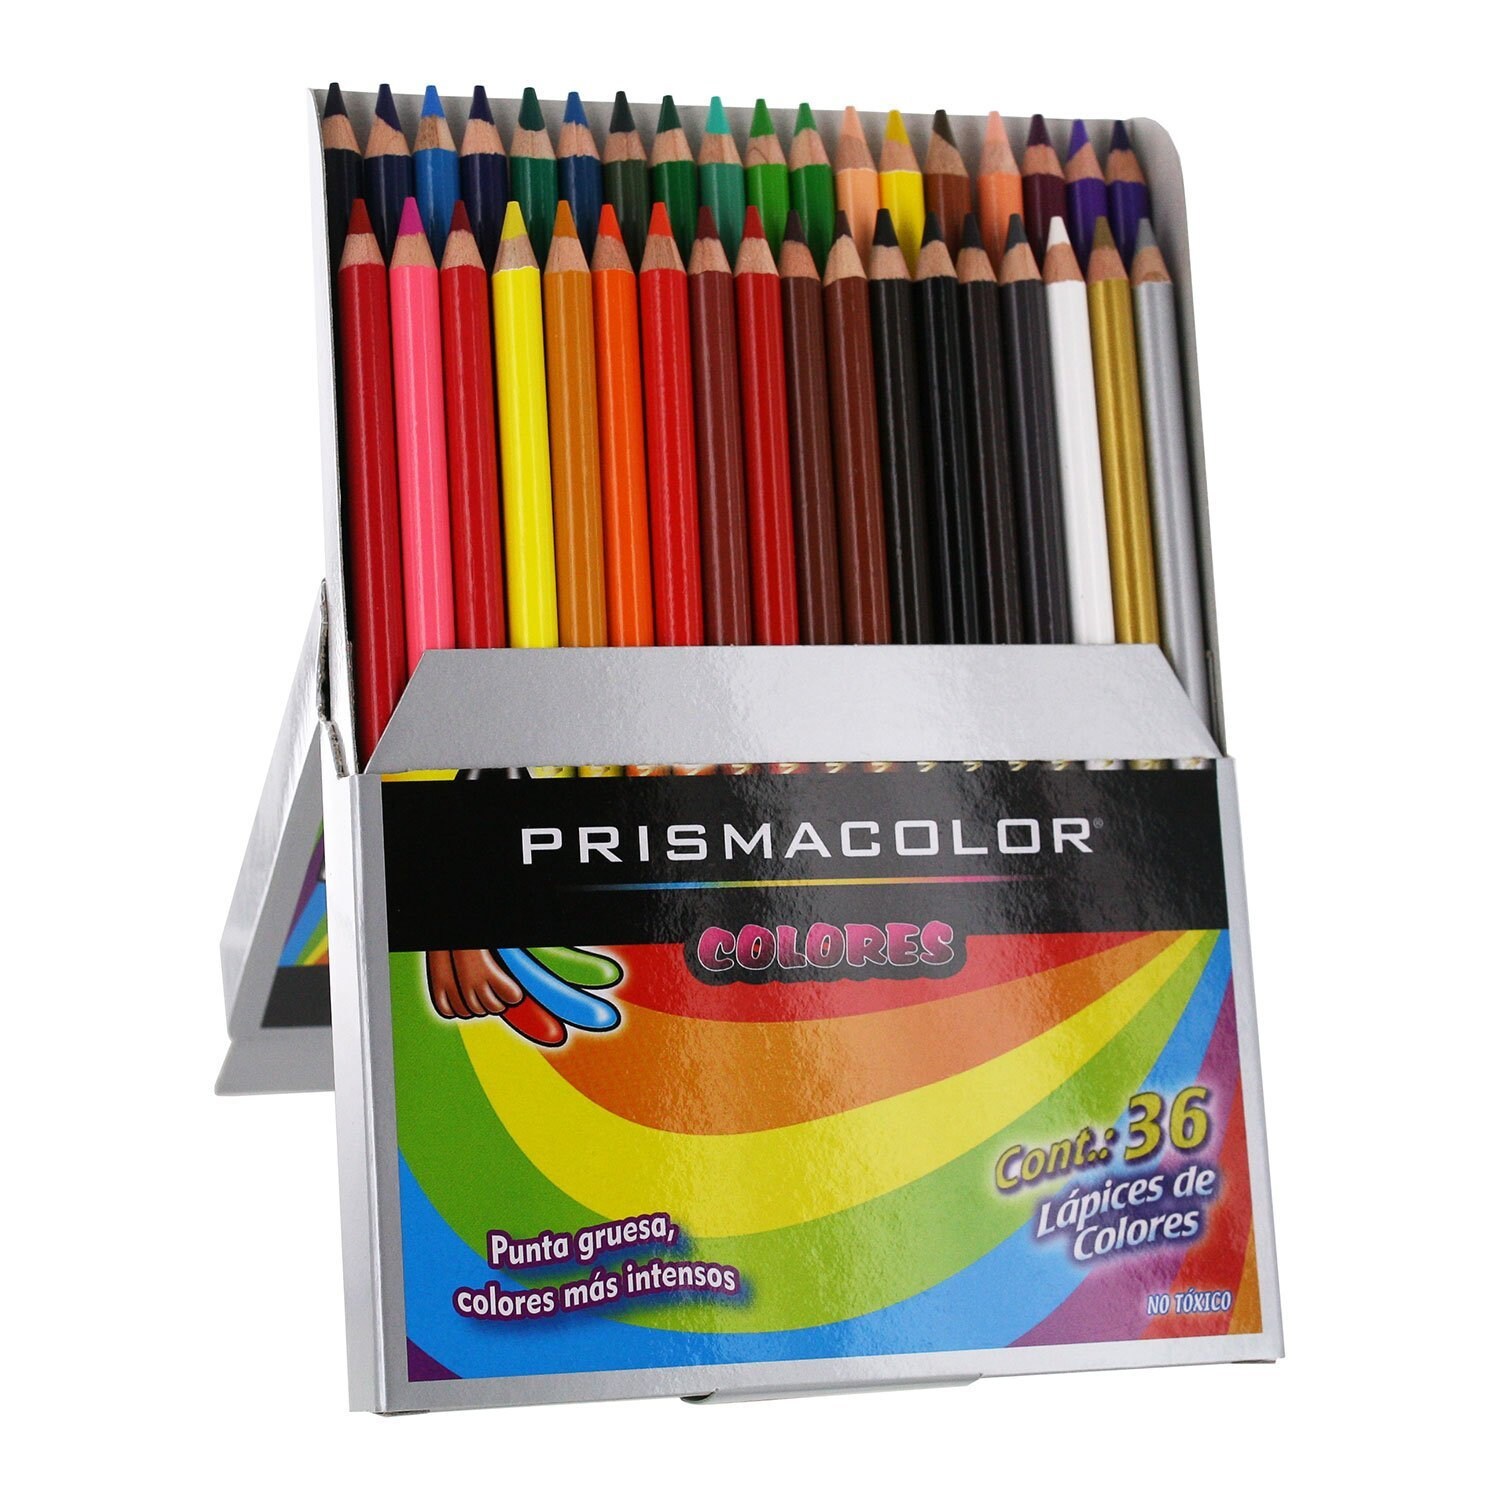 KALOUR 36 Piece Sketching Pencils Art Set with Drawing Tools for